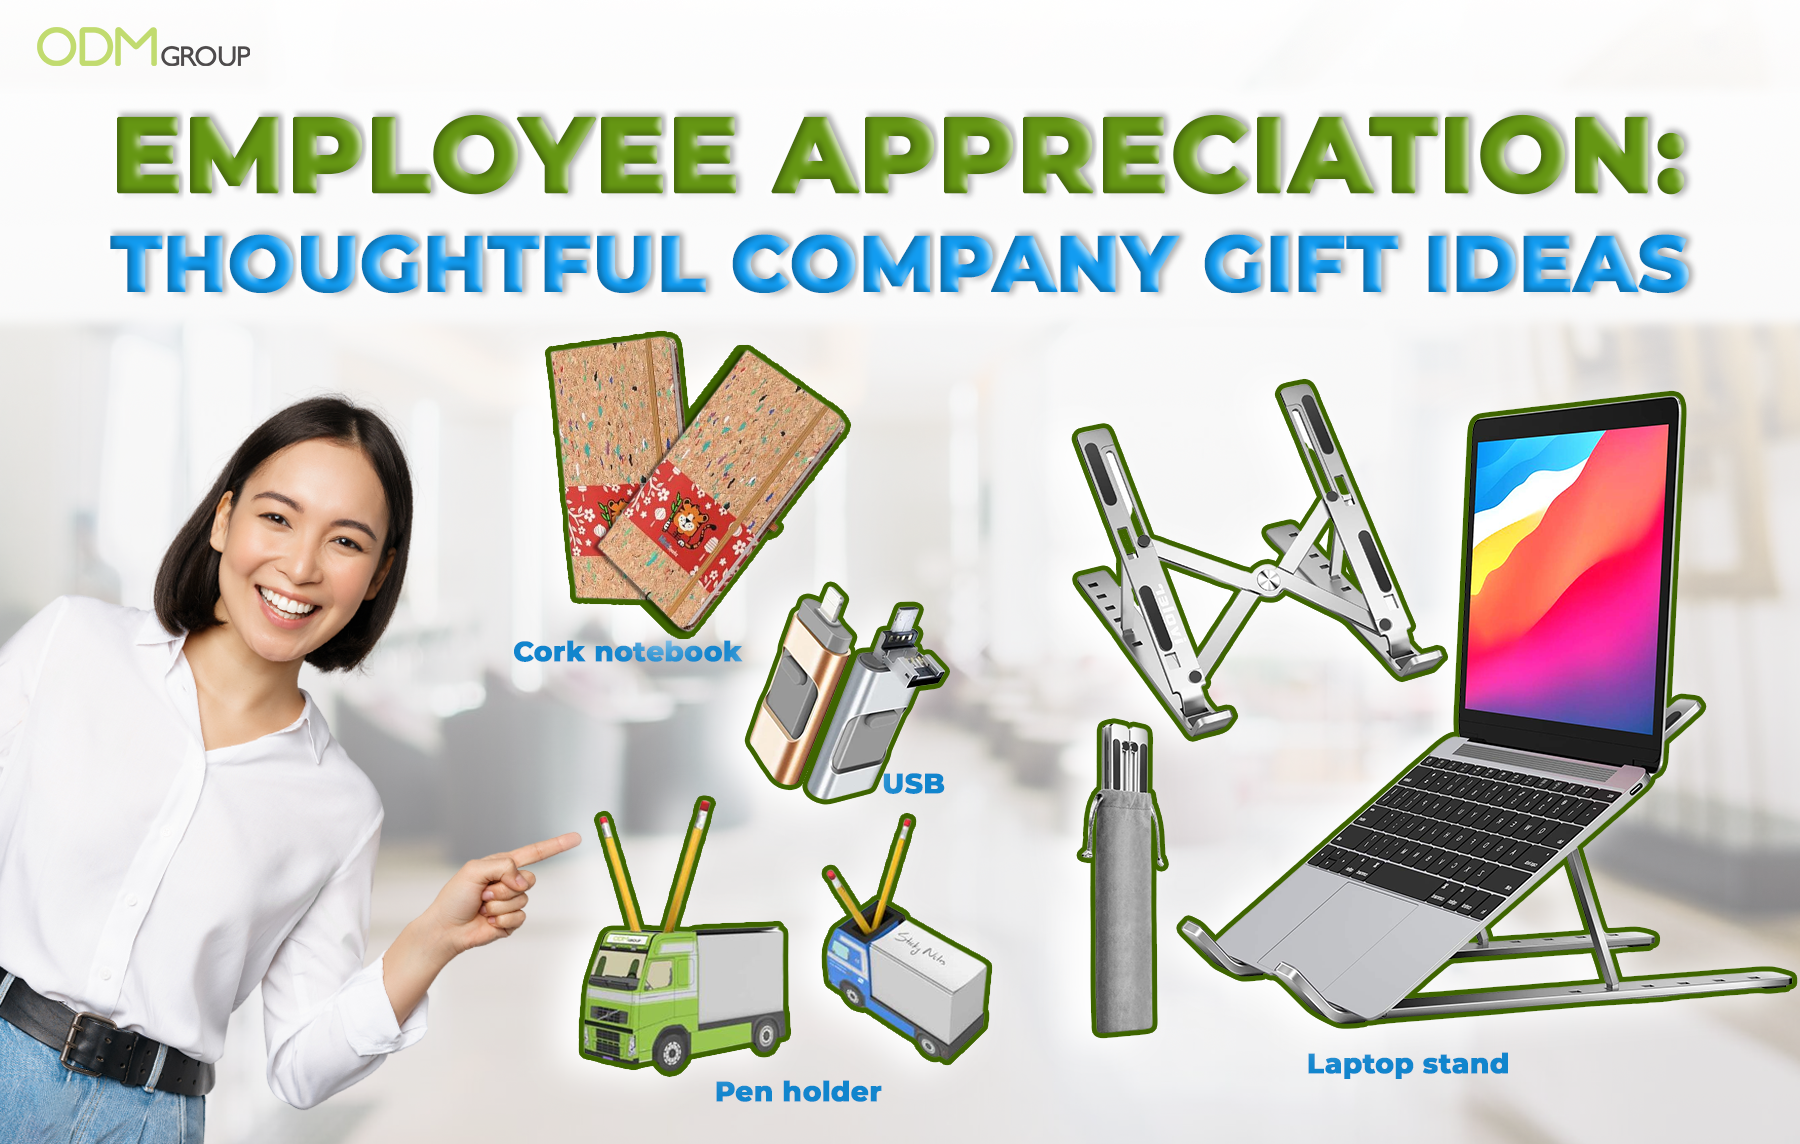 Thoughtful company gift ideas including cork notebook, pen holder, USB drive, and laptop stand.